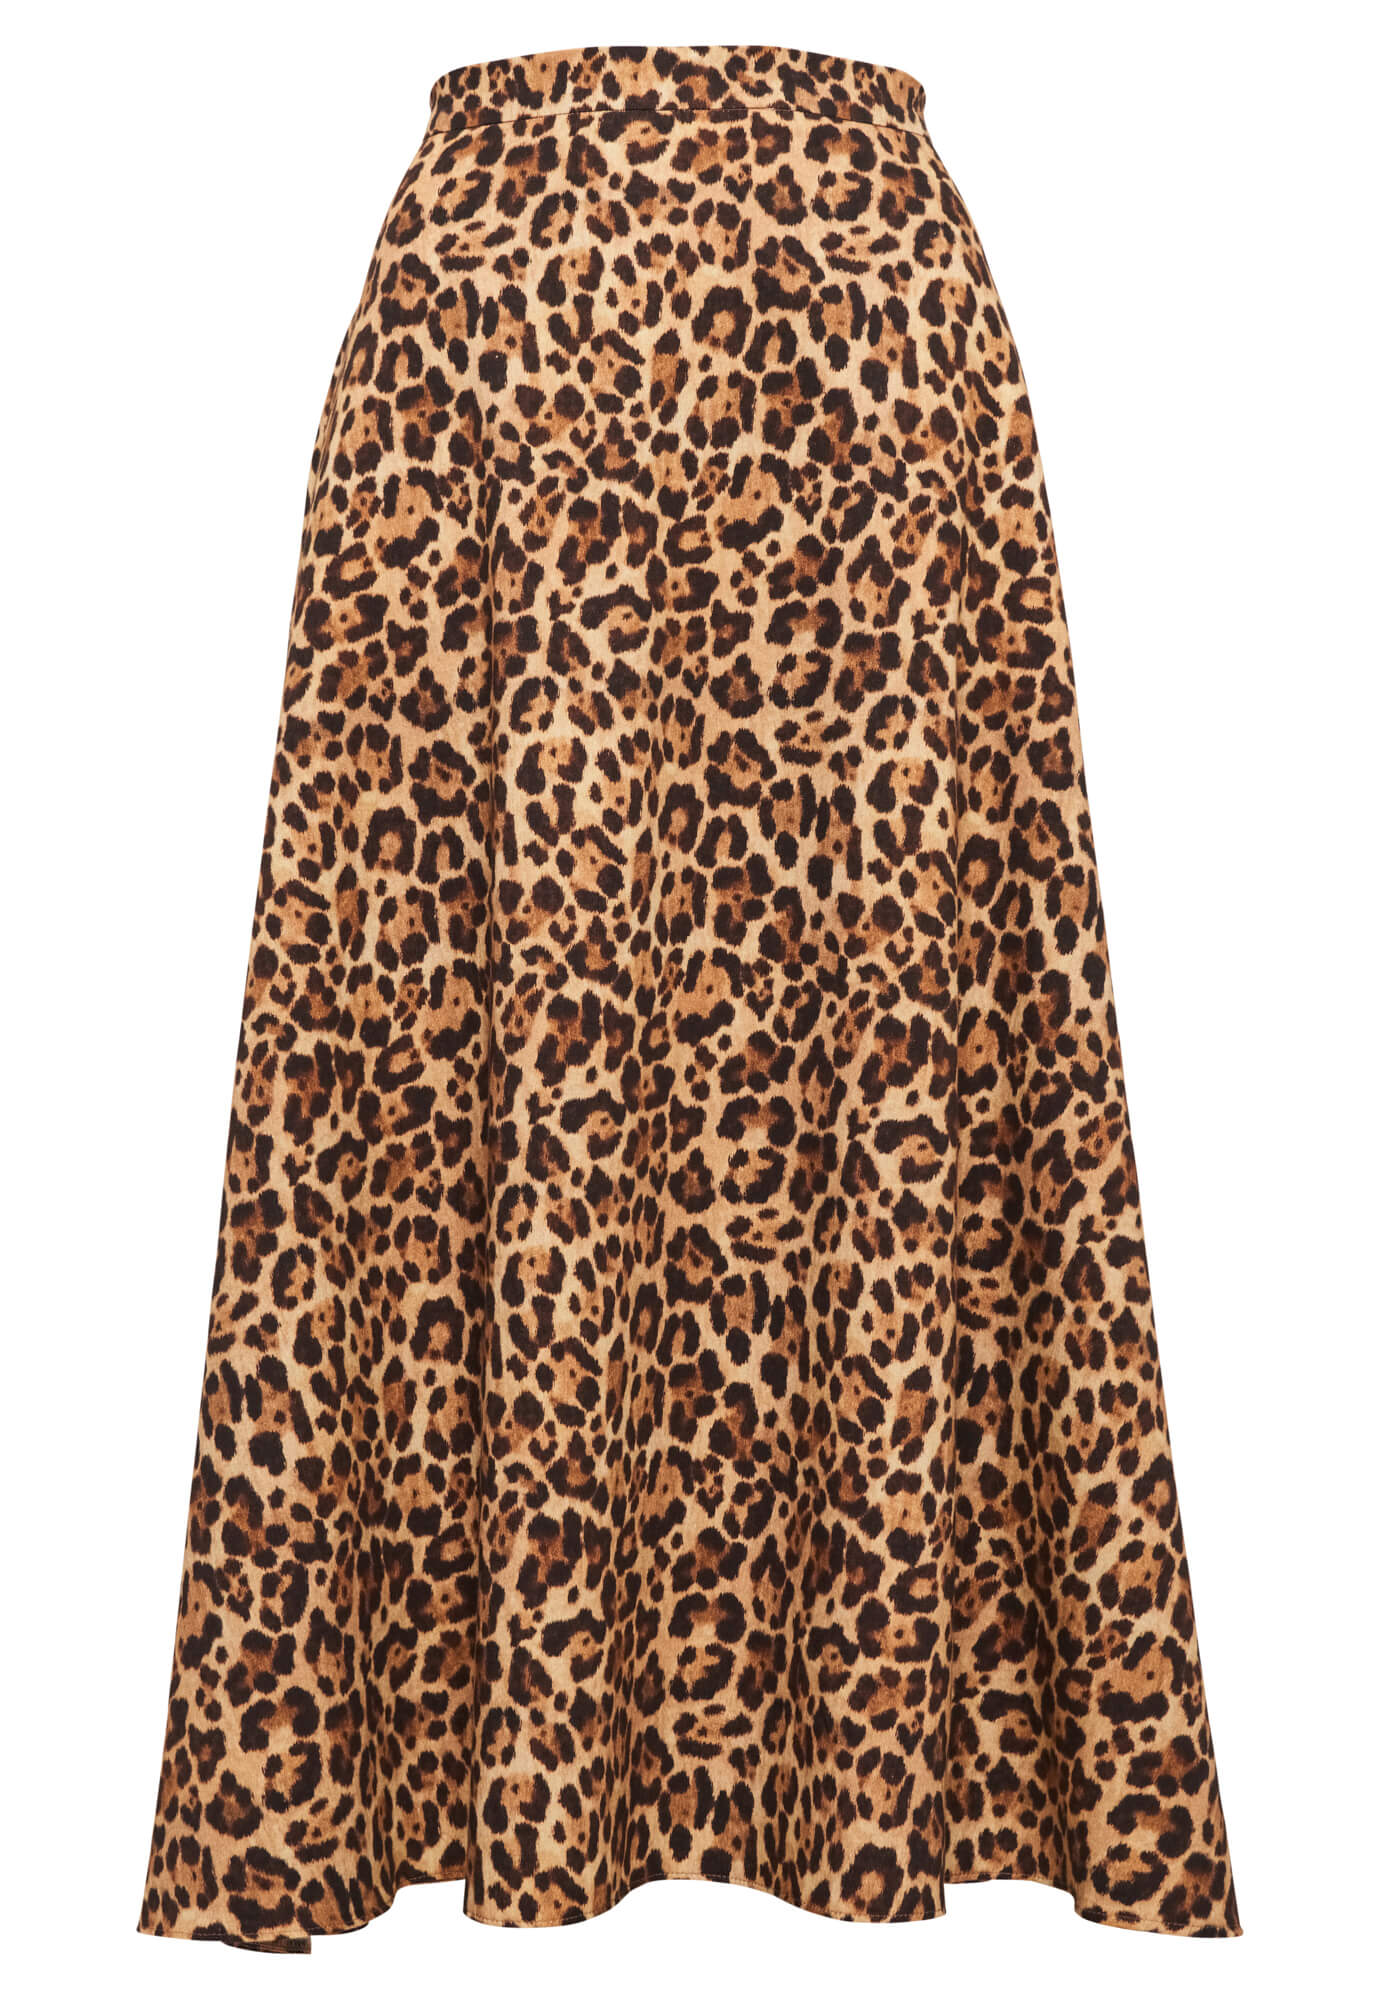 ADDITION Easy Skirt leopard XS